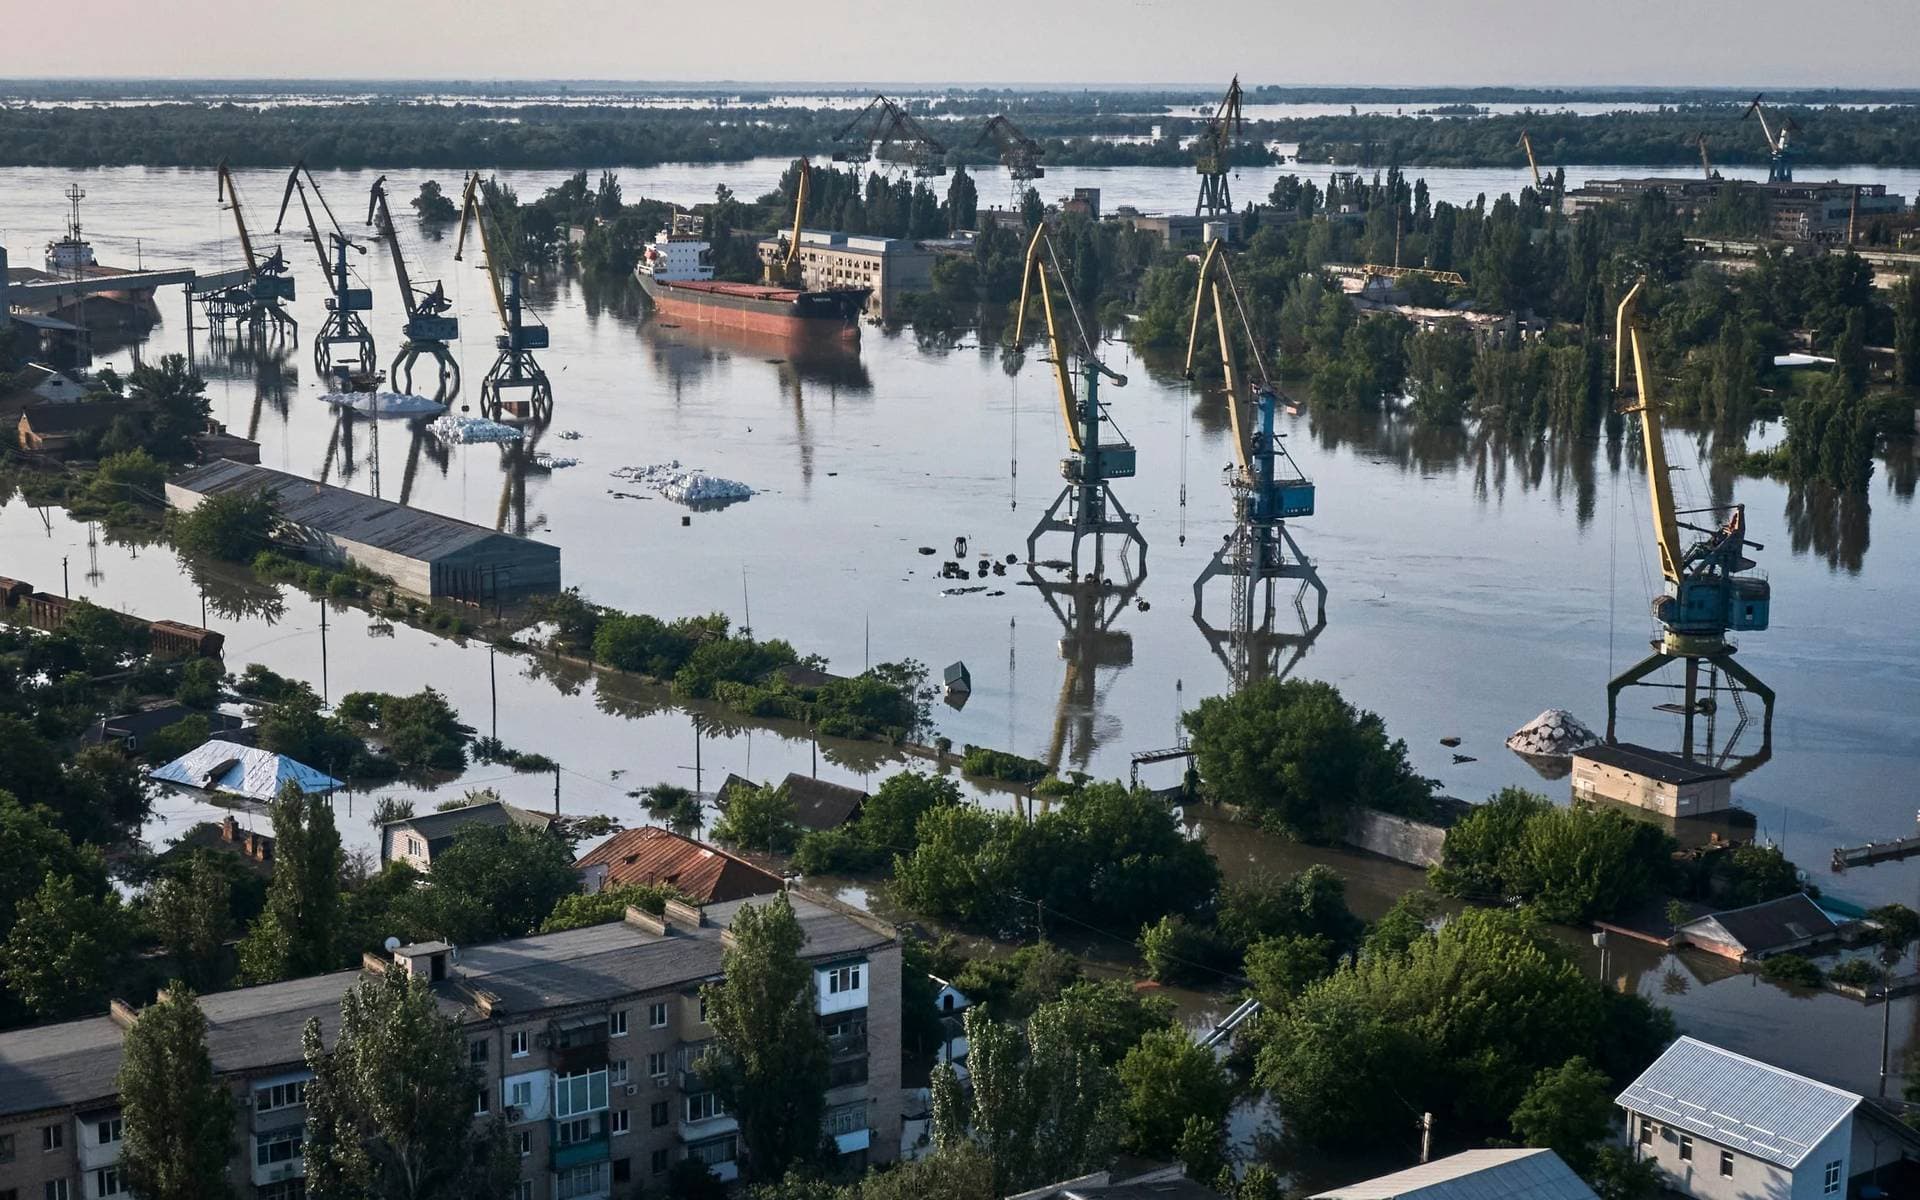 Streets in Kherson lie submerged in floodwater following the dam breach